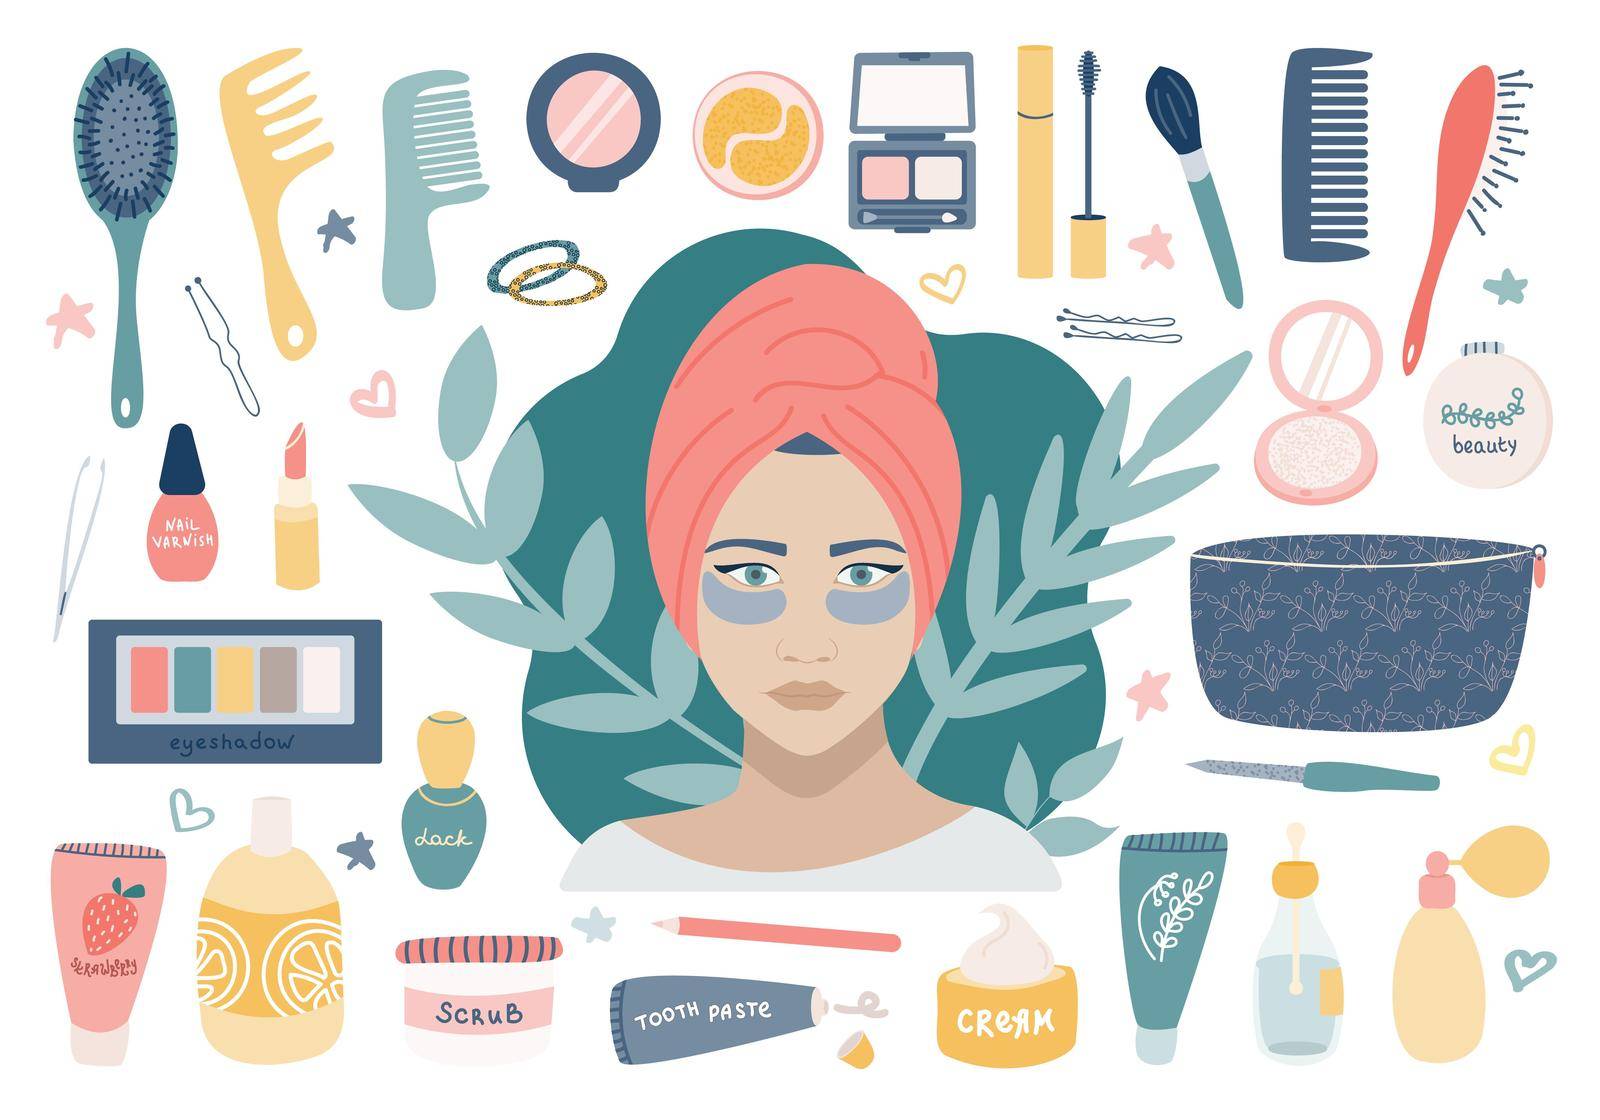 Large cosmetic set with grooming cosmetics. A girl with patches under her eyes, a makeup bag and its contents. Vector image on a white background.